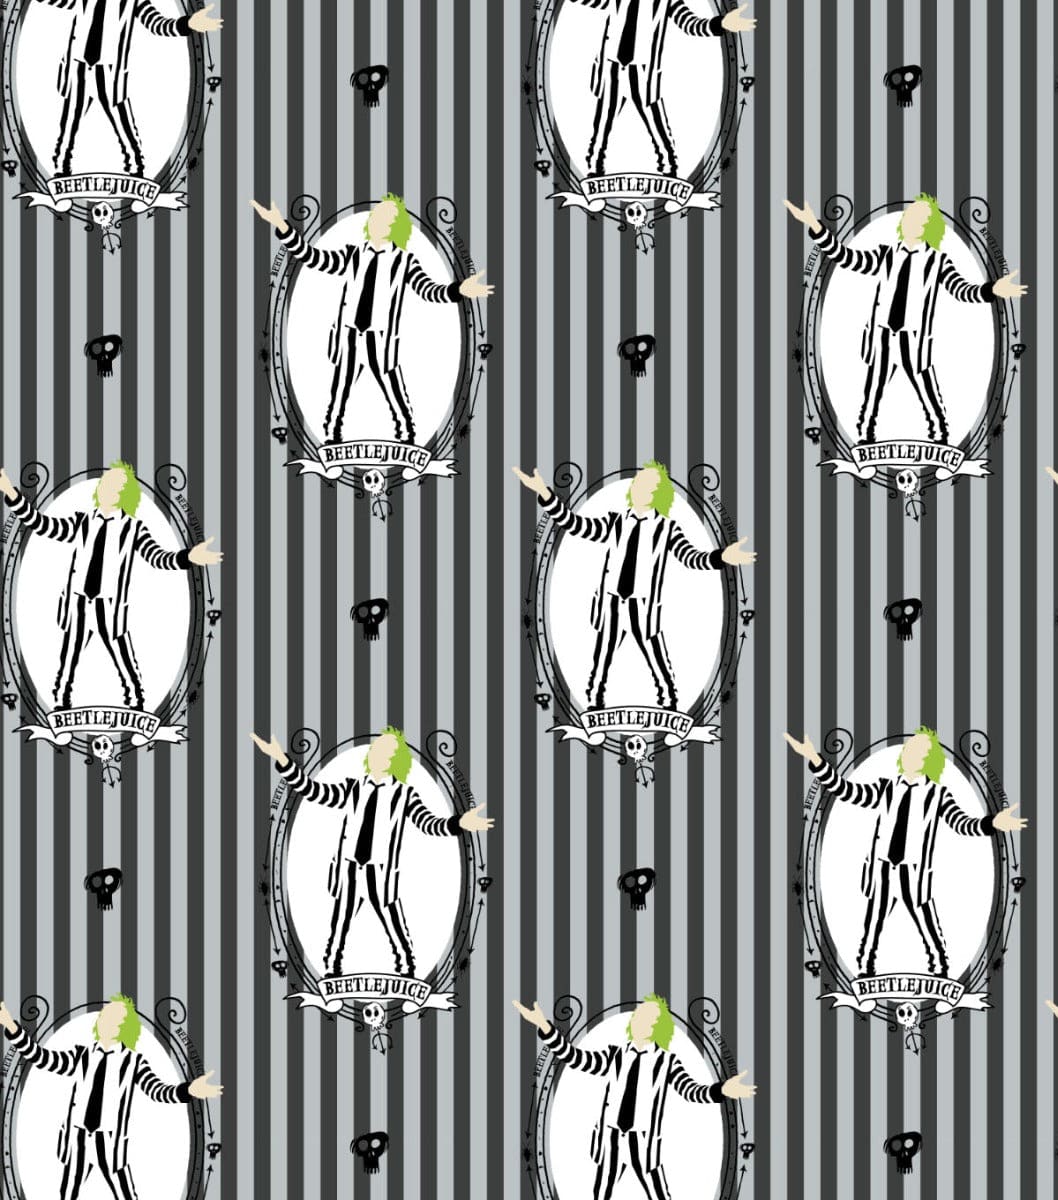 Beetlejuice It's Showtime Fabric